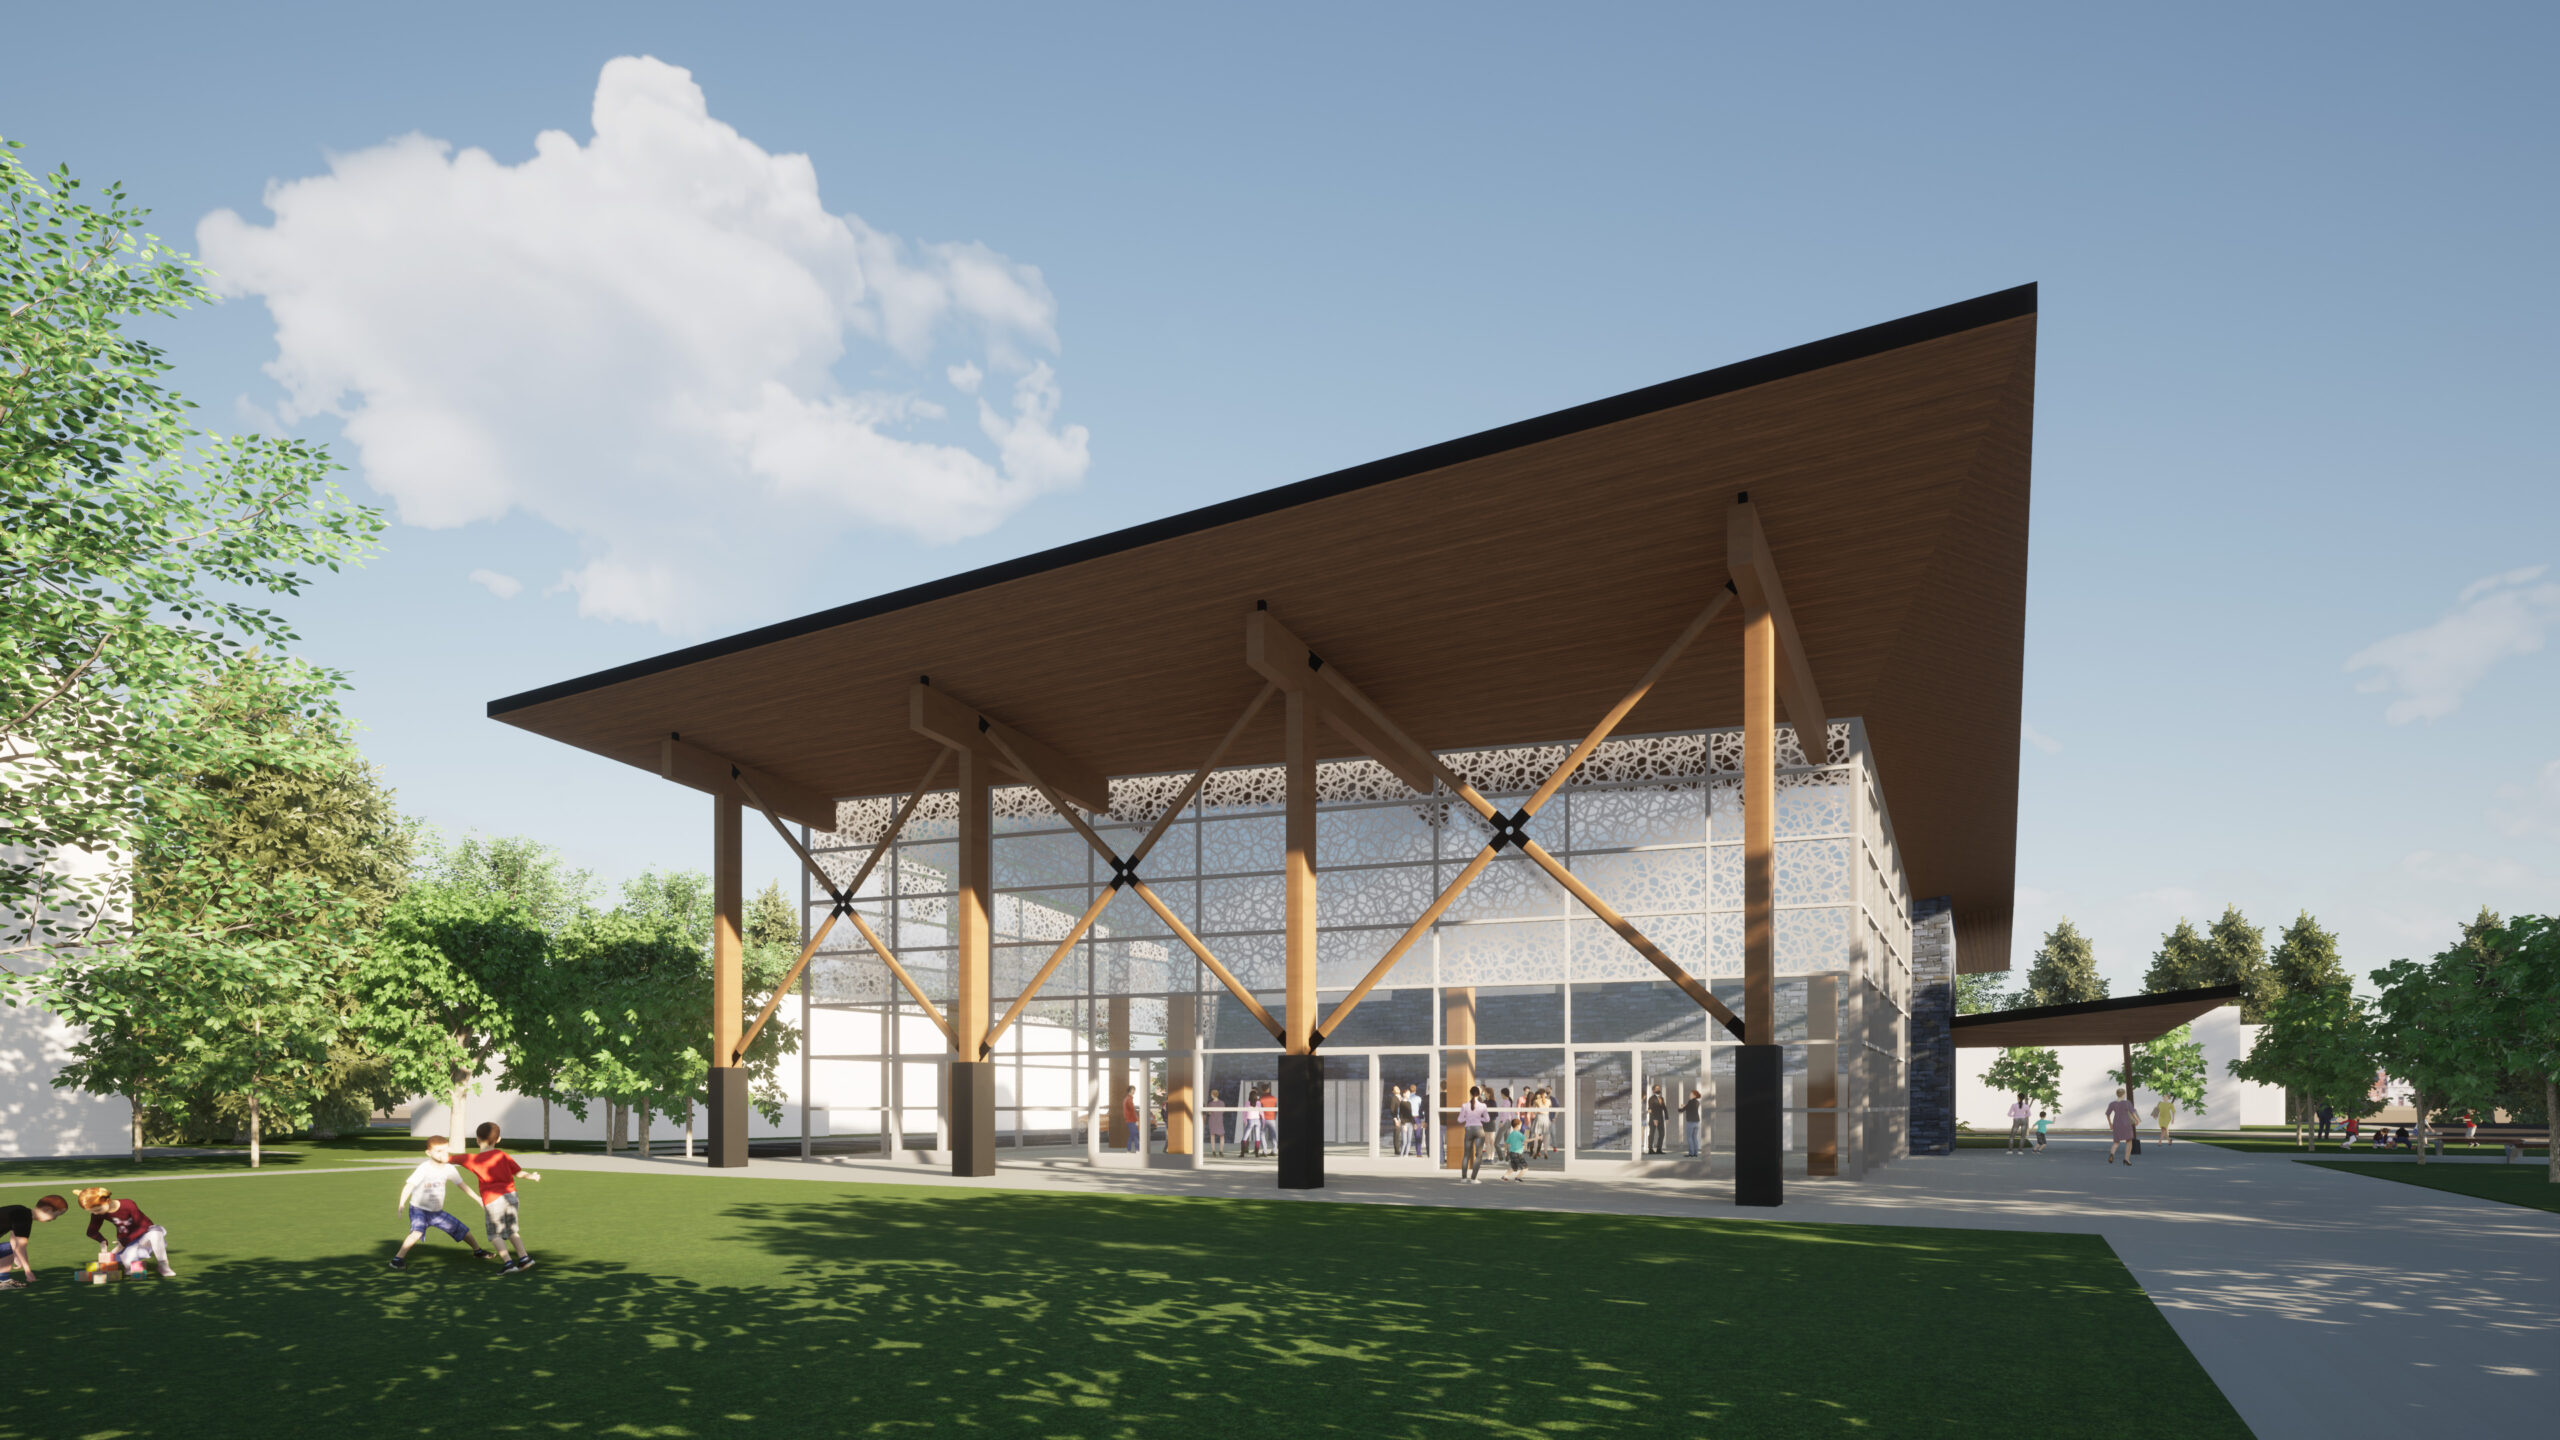 Exterior front visualization of Community building, designed by nba architects. Project is focused on sustainable construction and includes traditional exposed mass-timber, post & beam construction, and a low pitch long-span roof.